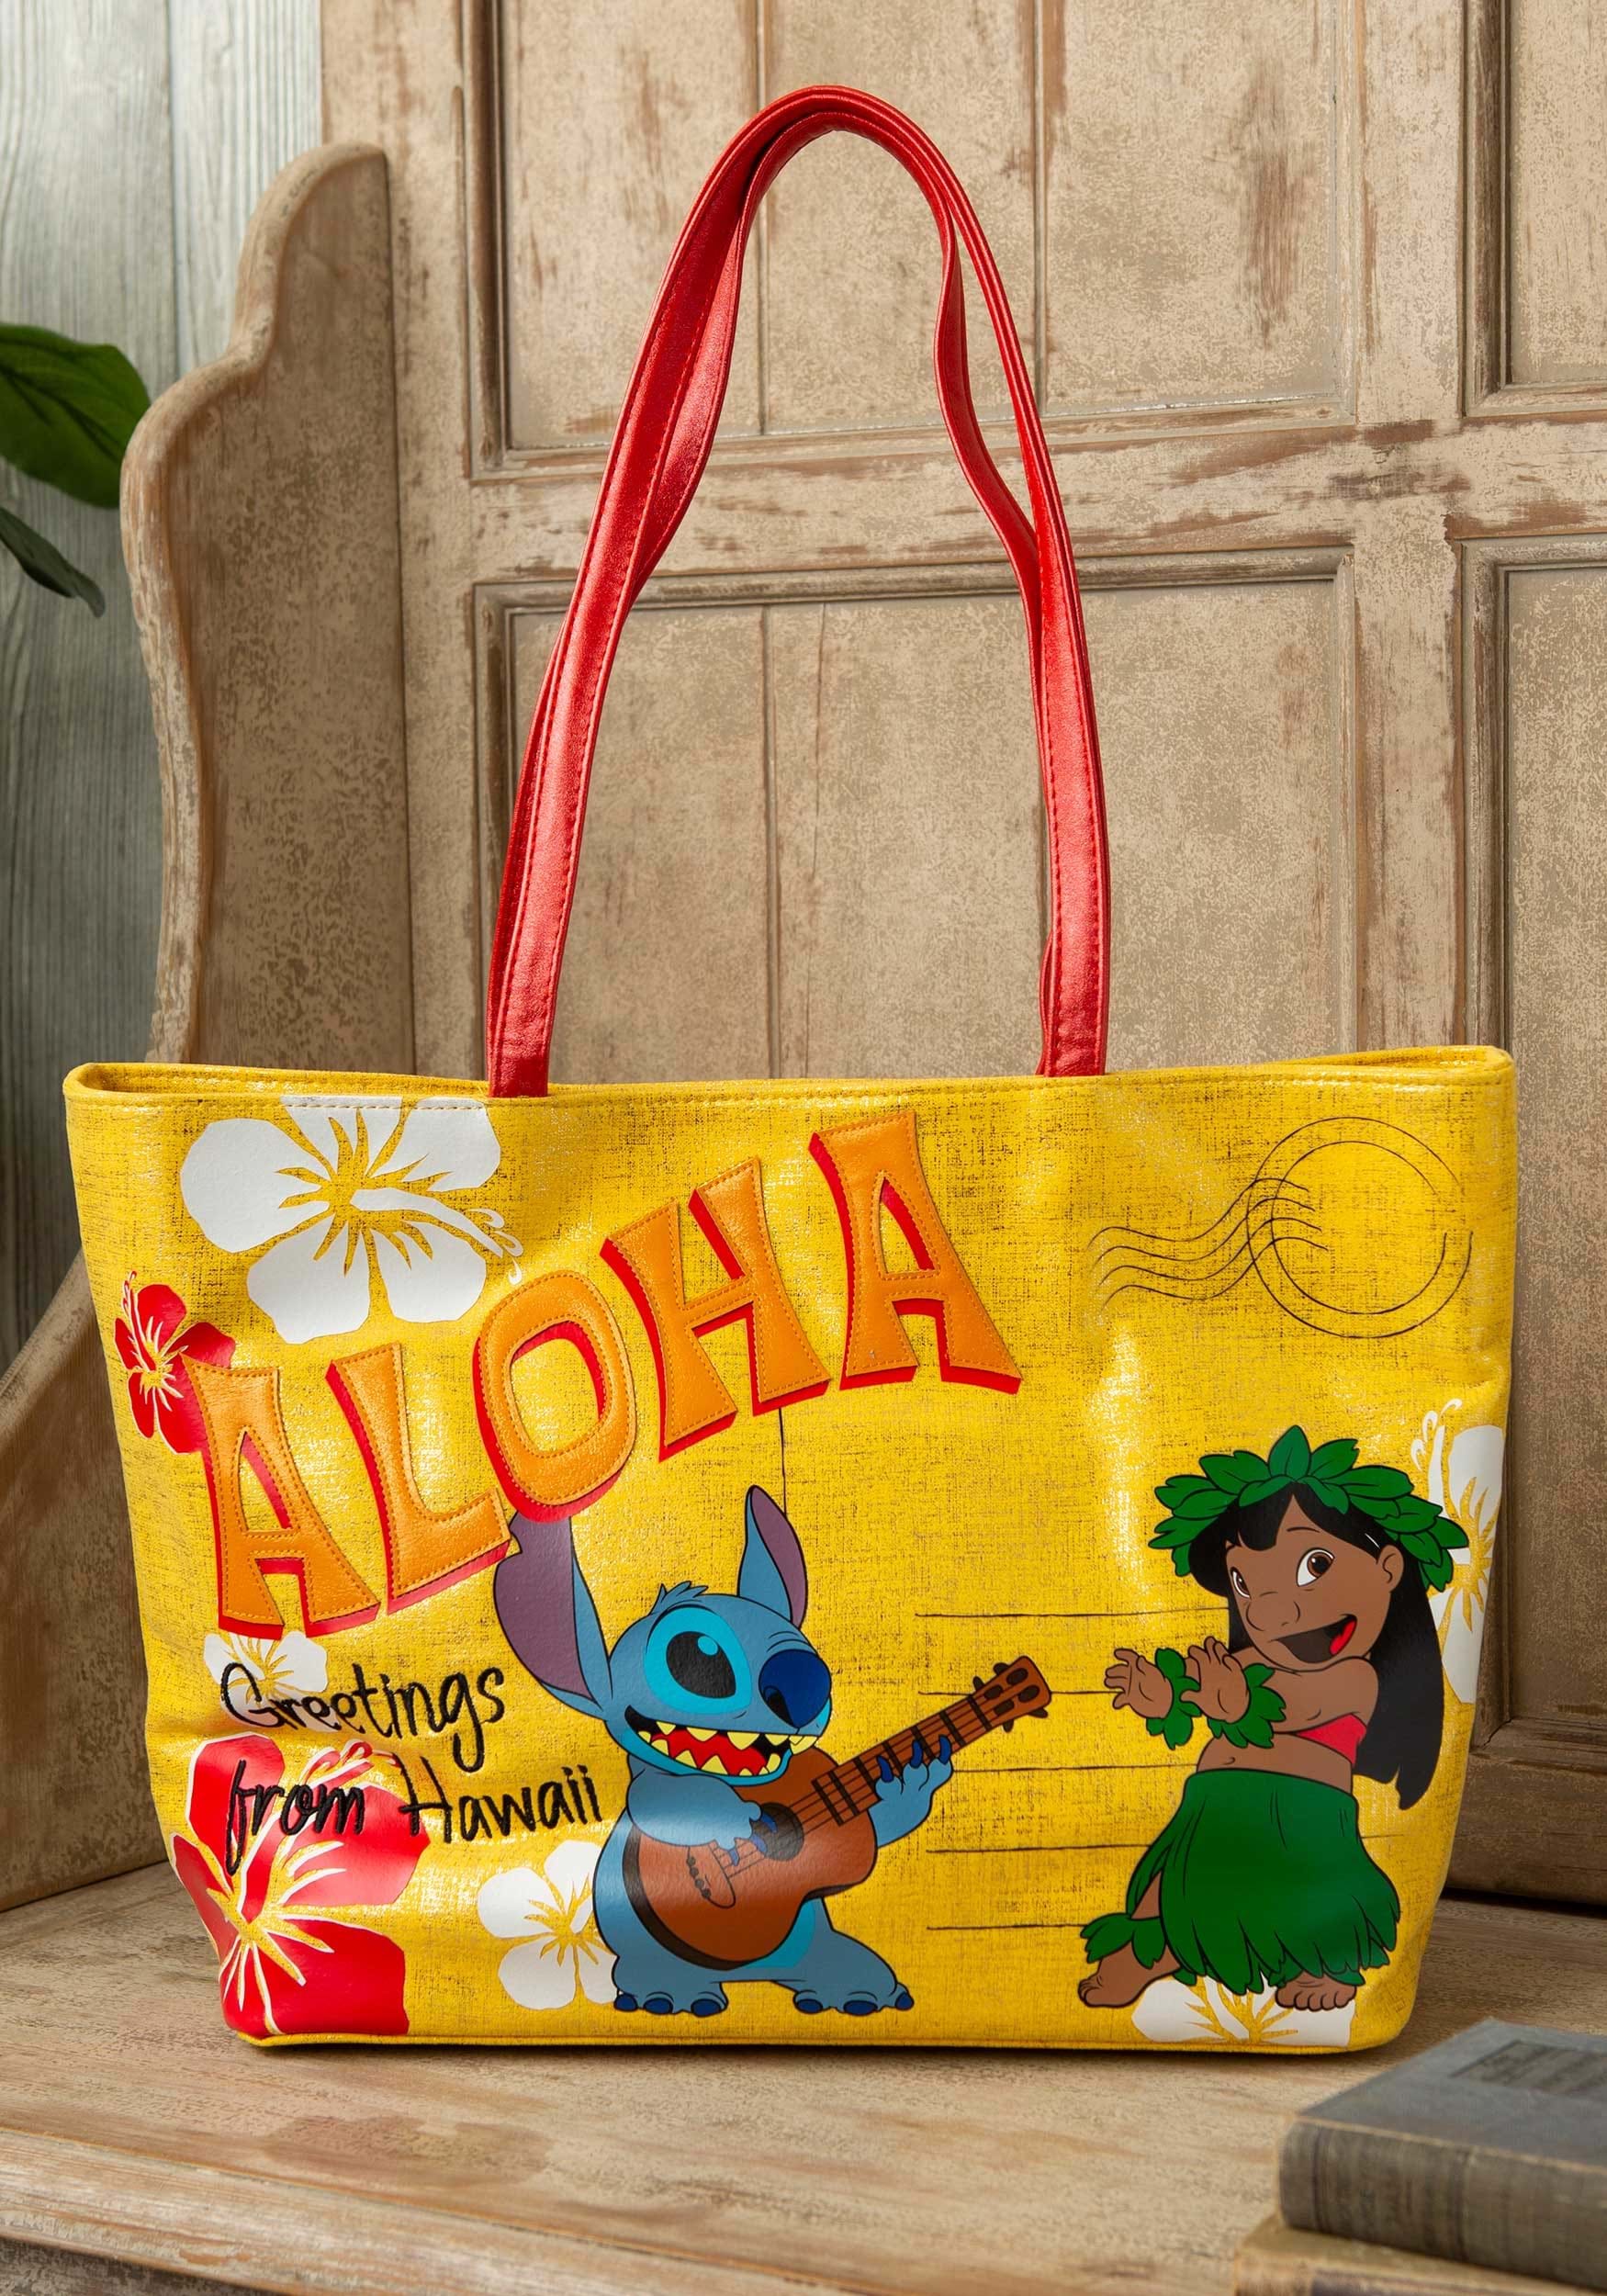 Moana Loungefly Canvas And Burlap Tote Bag From Loungefly Fandom Shop - roblox death sound tote bag